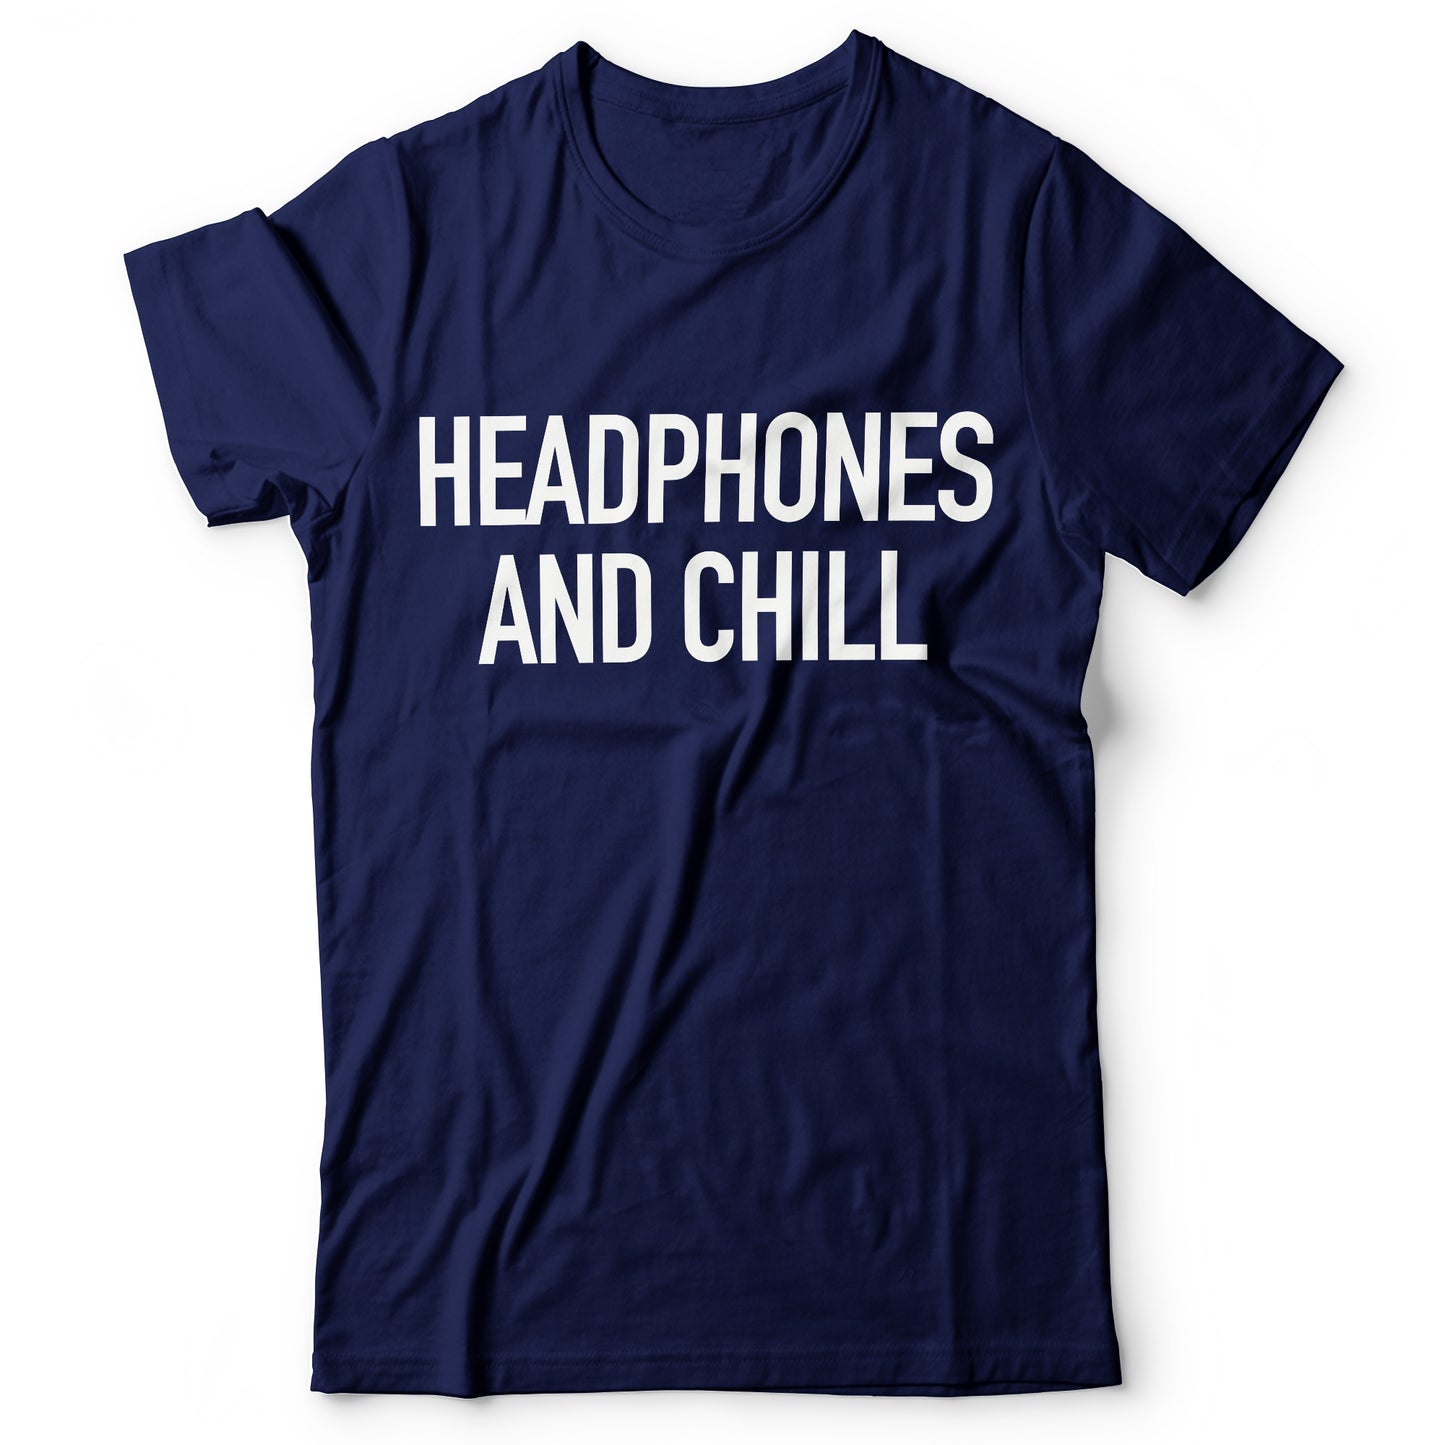 Headphones and Chill - T-shirt